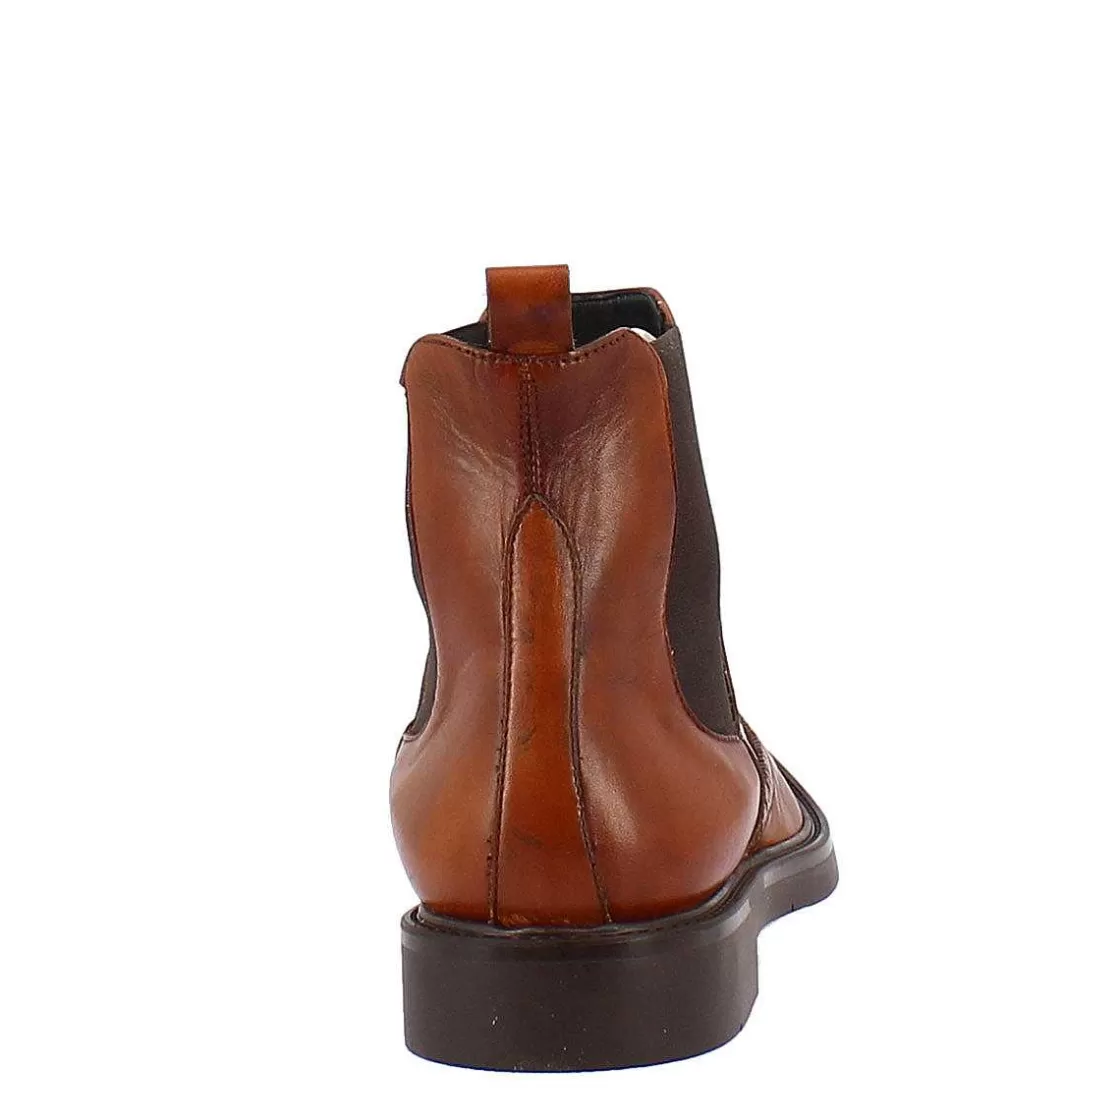 Leonardo Chelsea Boot In Tan Leather With Rubber Sole Discount